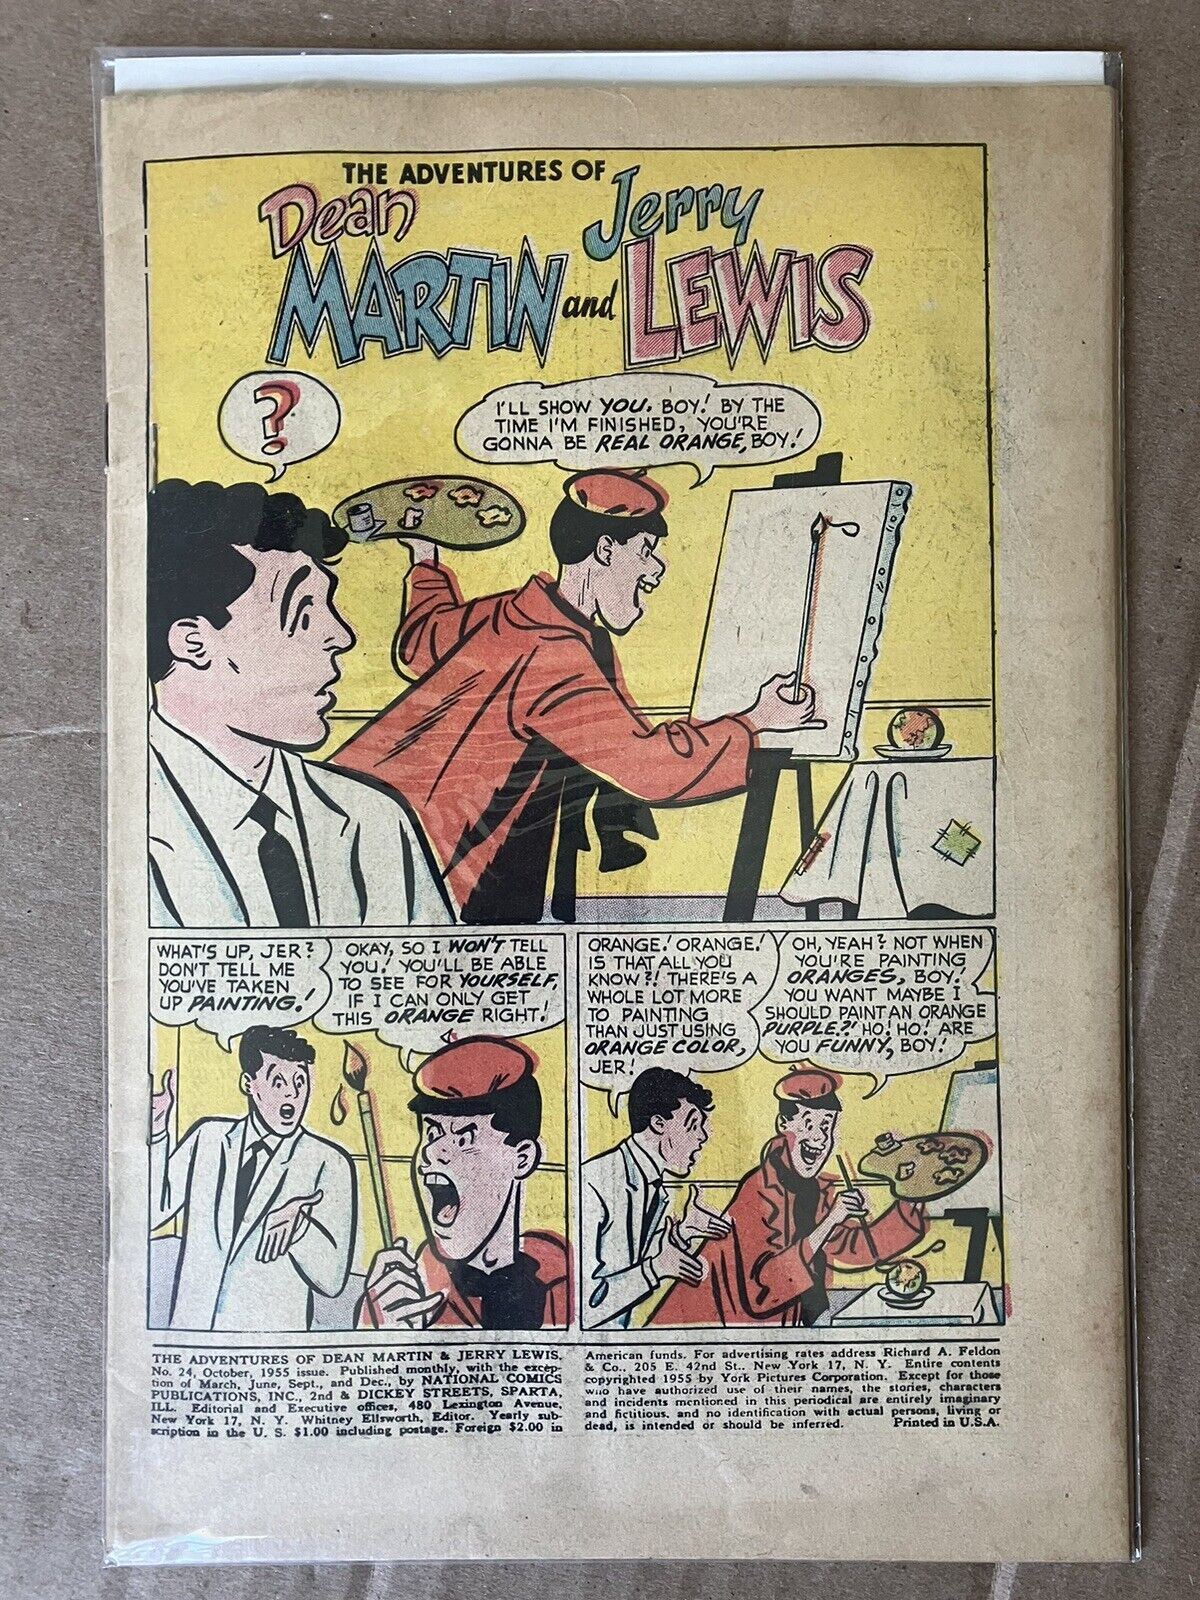 Adventures of Dean Martin and Jerry Lewis #24 1955 COVERLESS